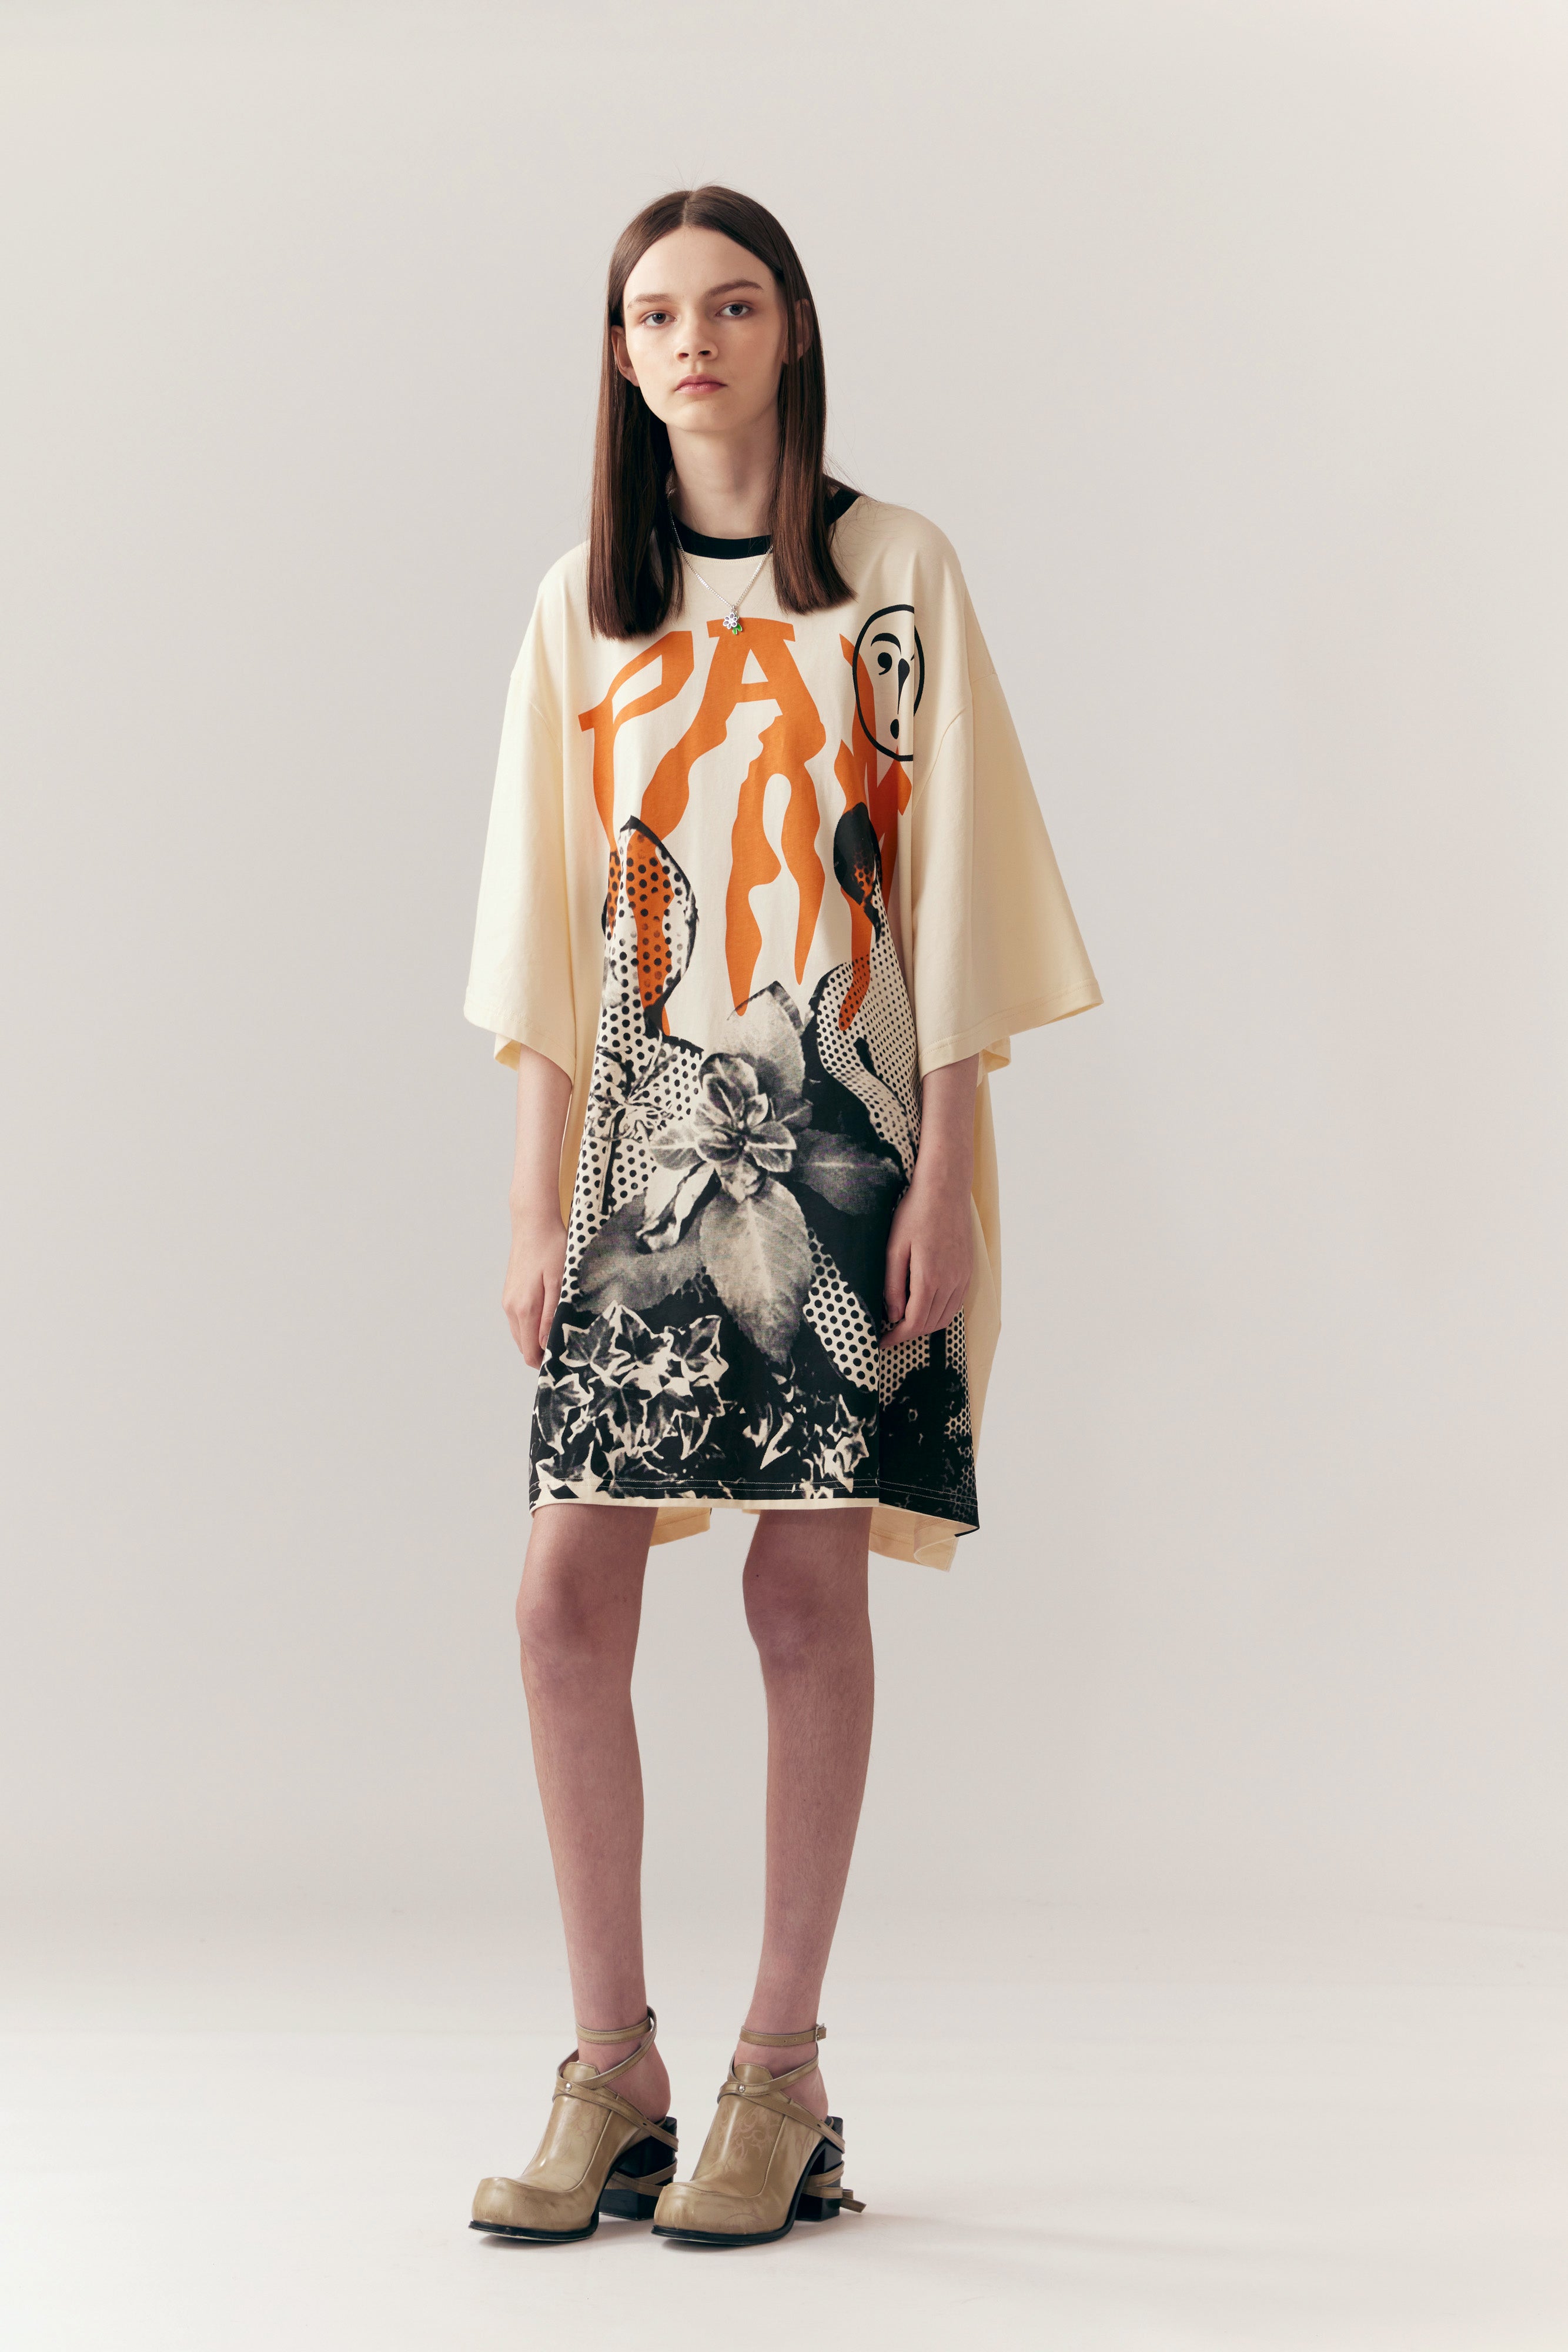 The IVY OVERSIZED T SHIRT DRESS  available online with global shipping, and in PAM Stores Melbourne and Sydney.